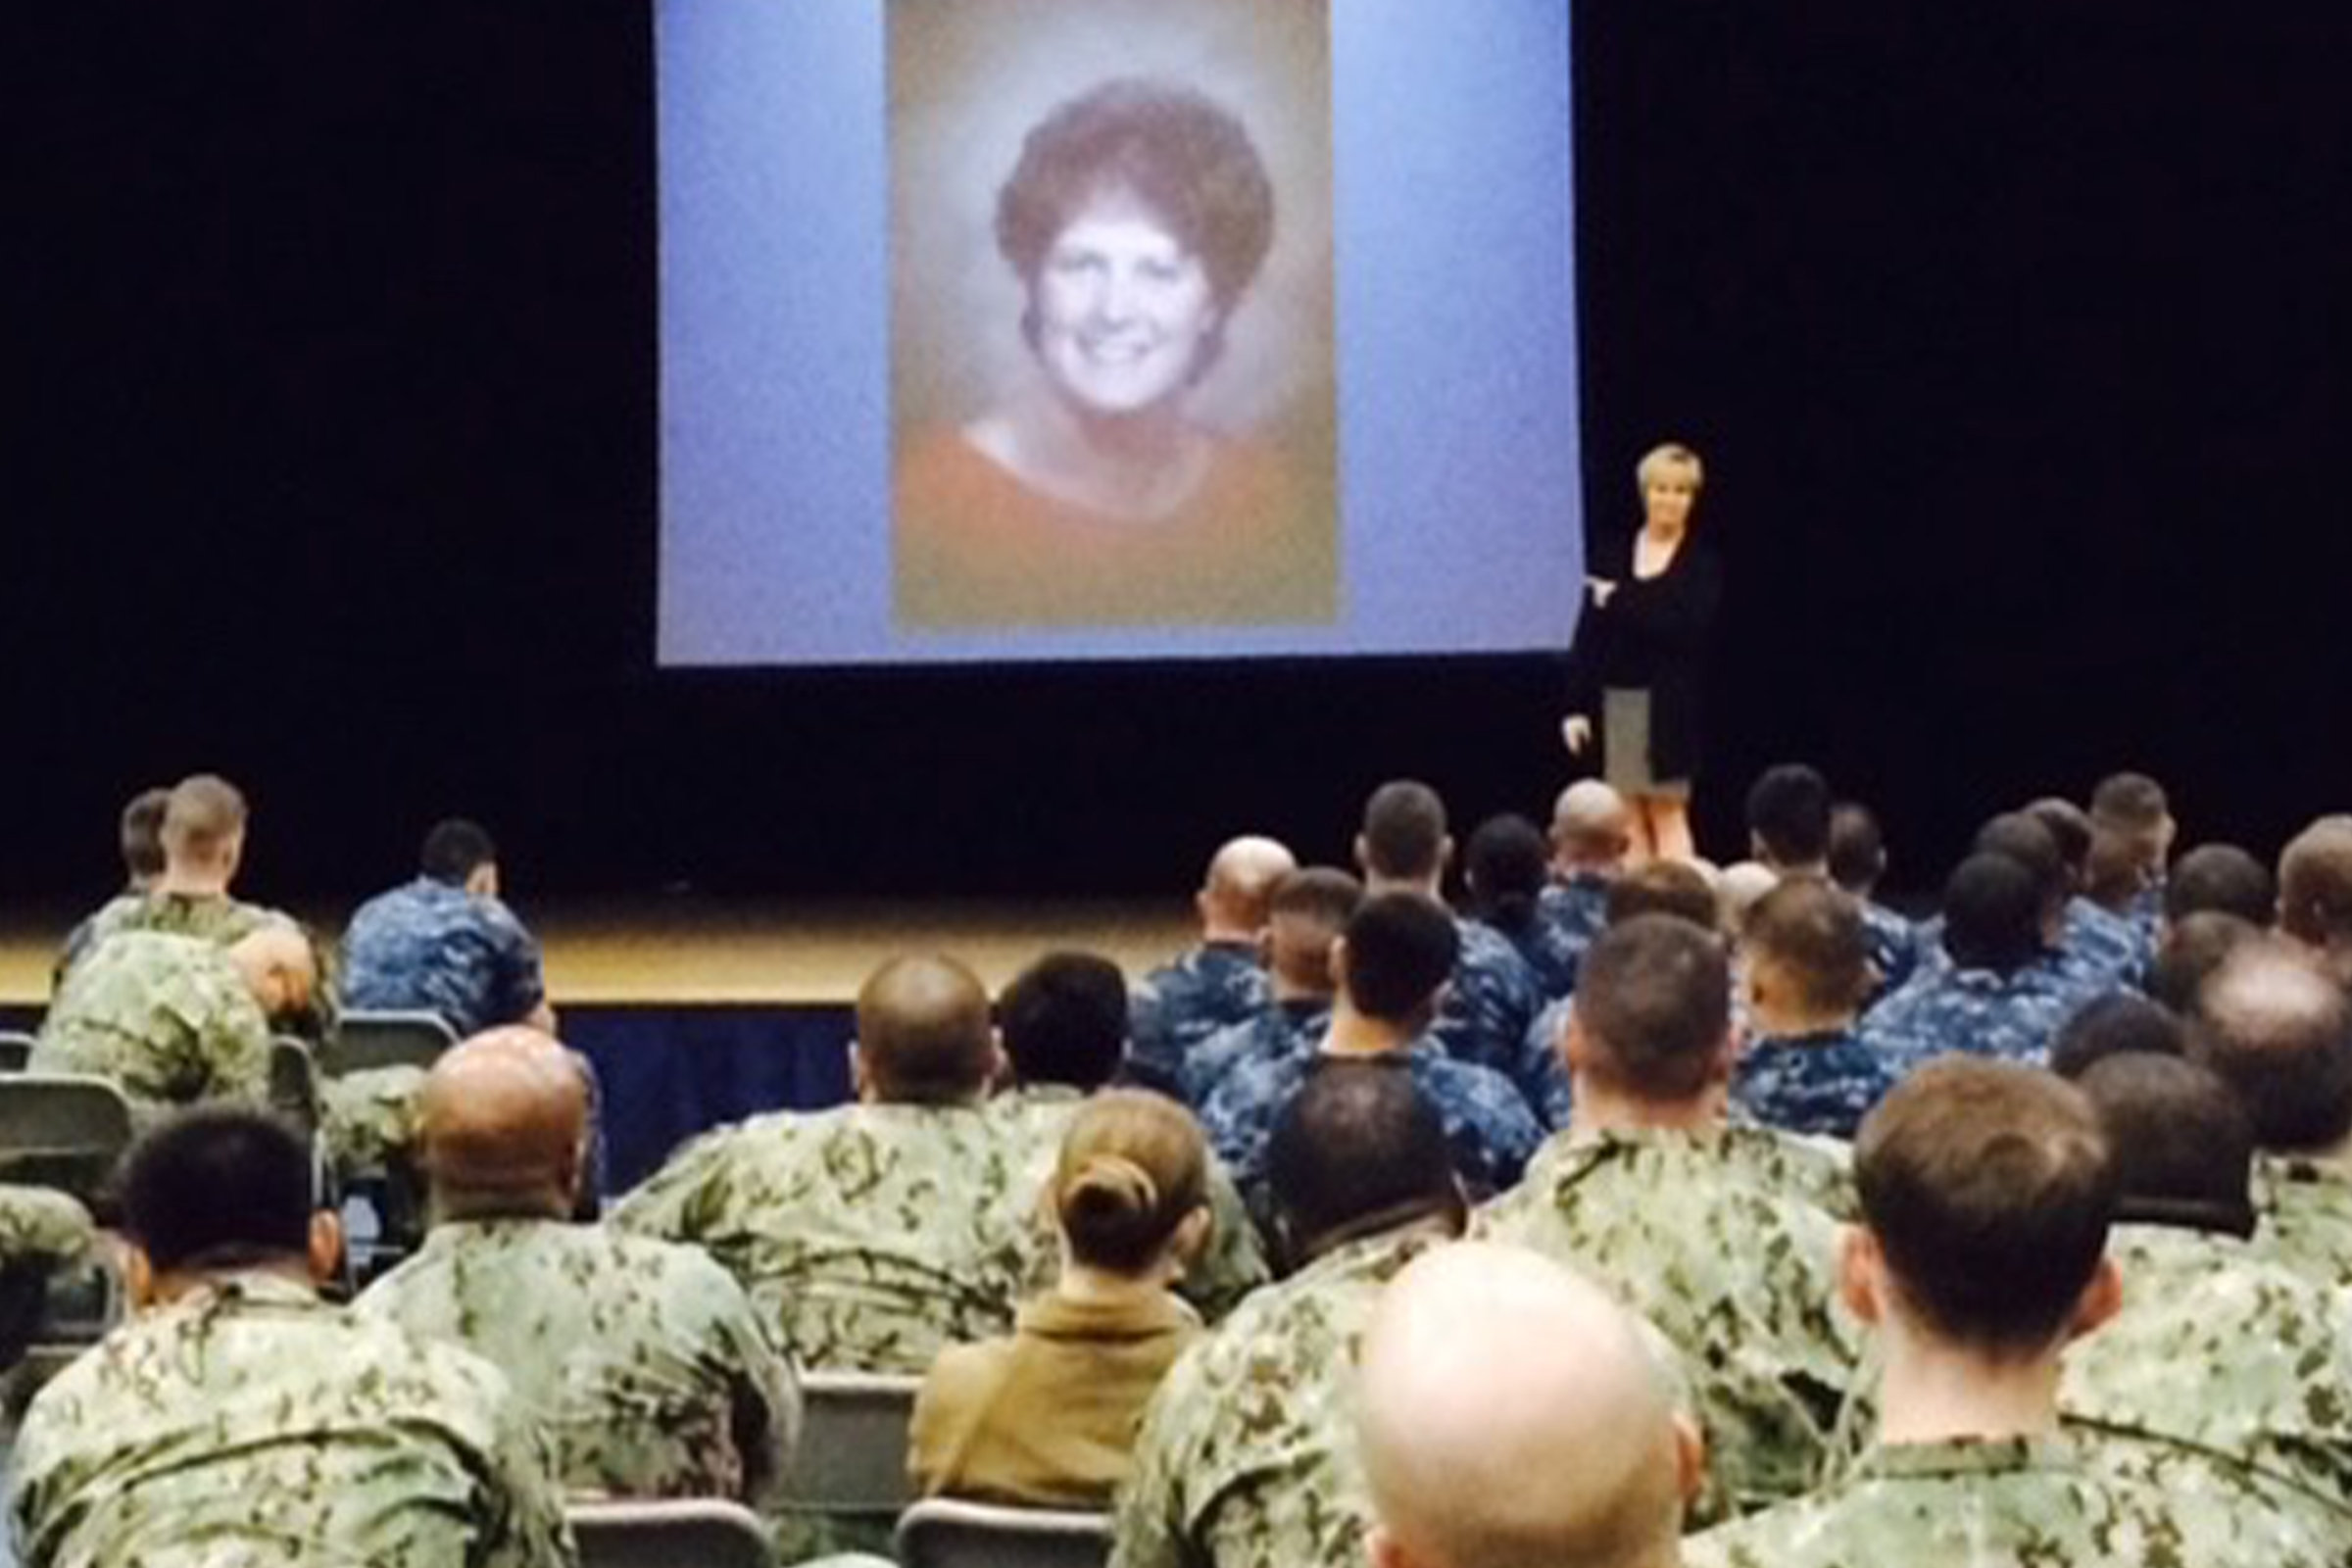 Janine speaking at a military base